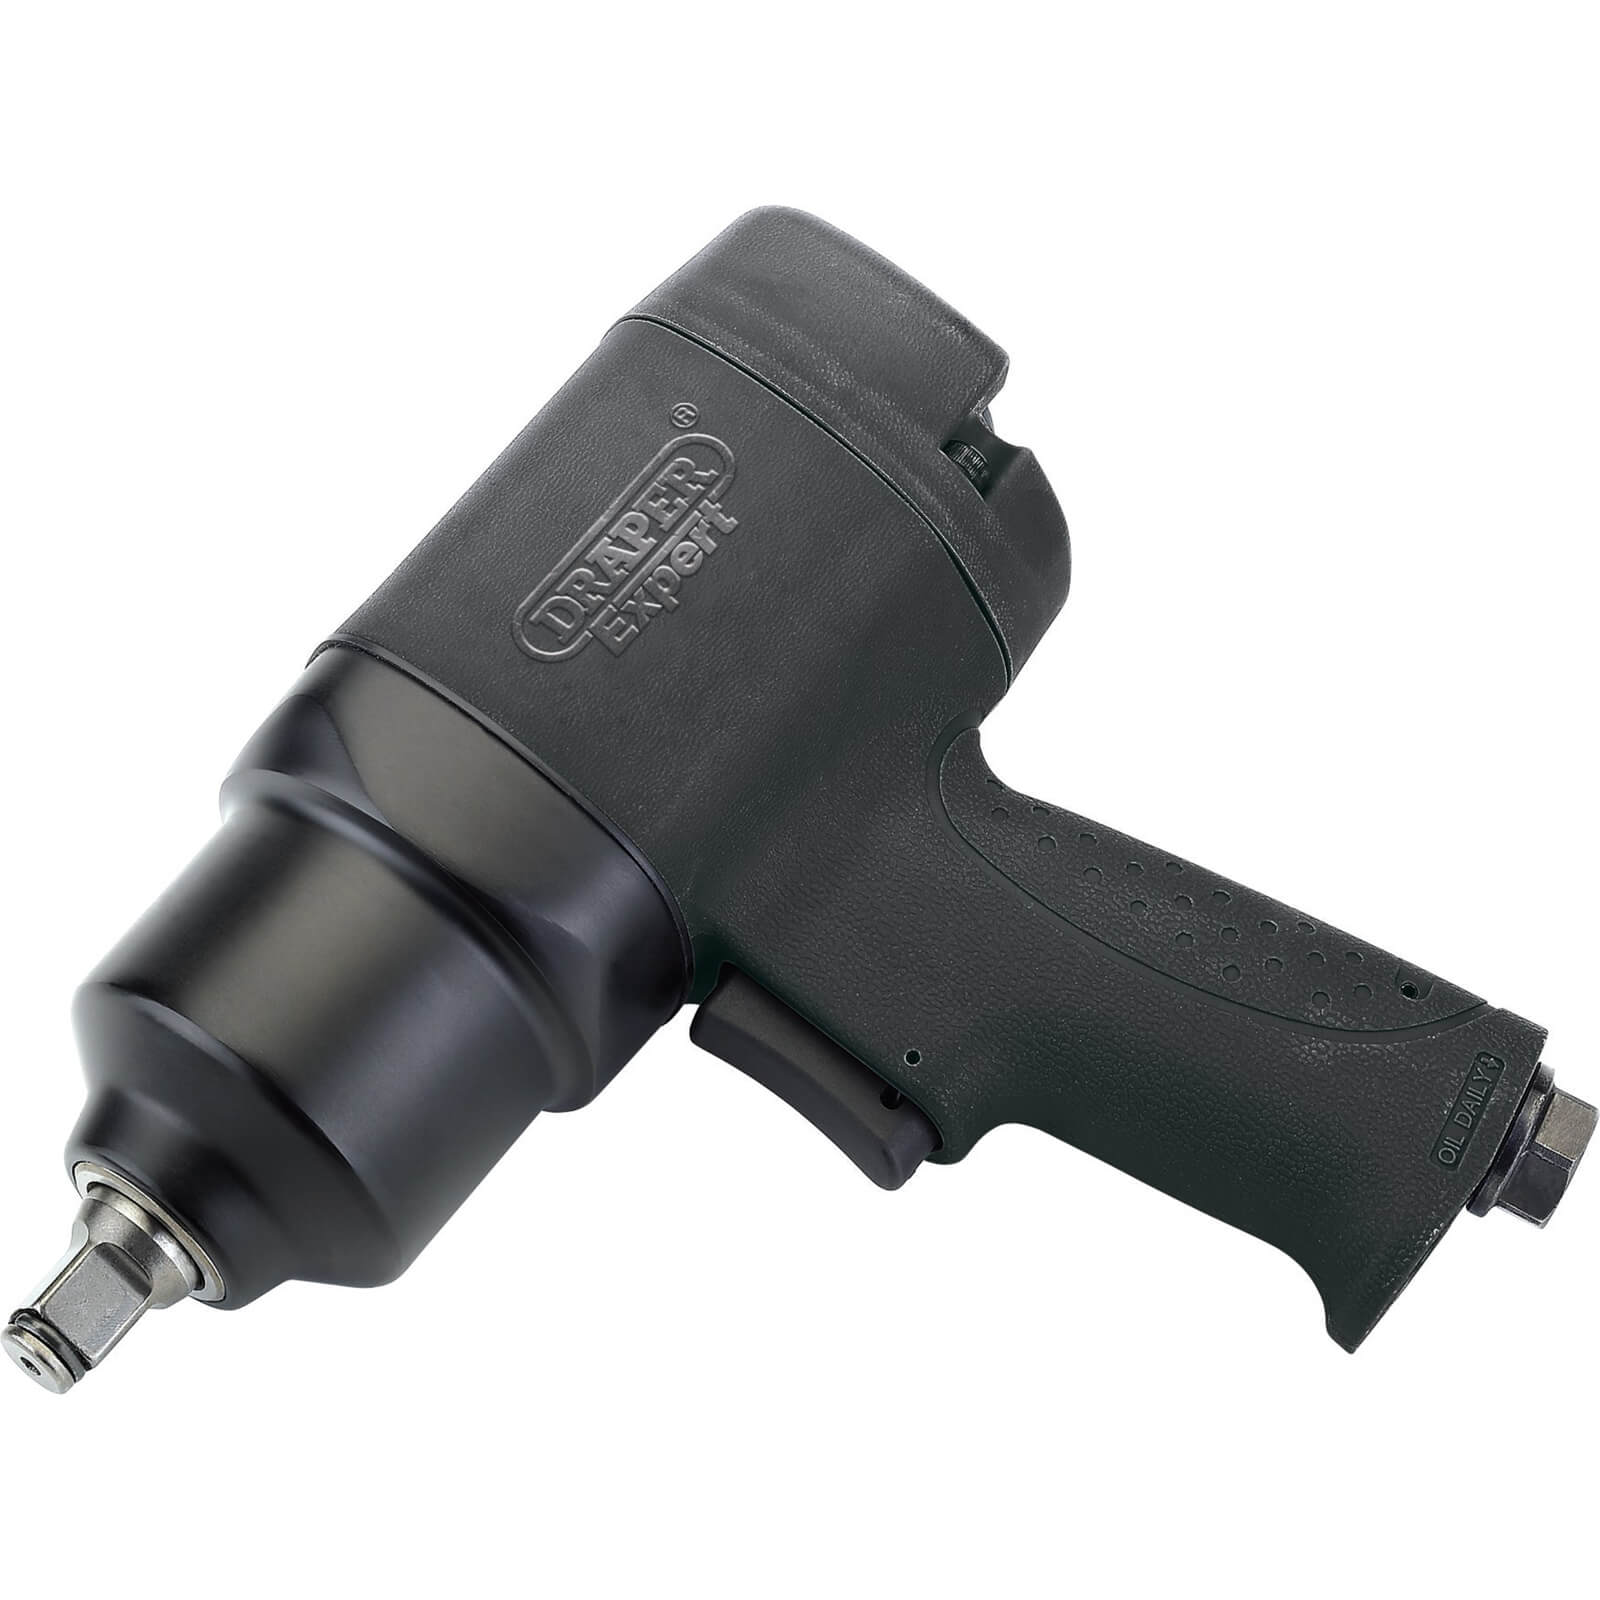 Image of Draper 5201PRO Composite Body Air Impact Wrench 1/2" Drive 1/2"